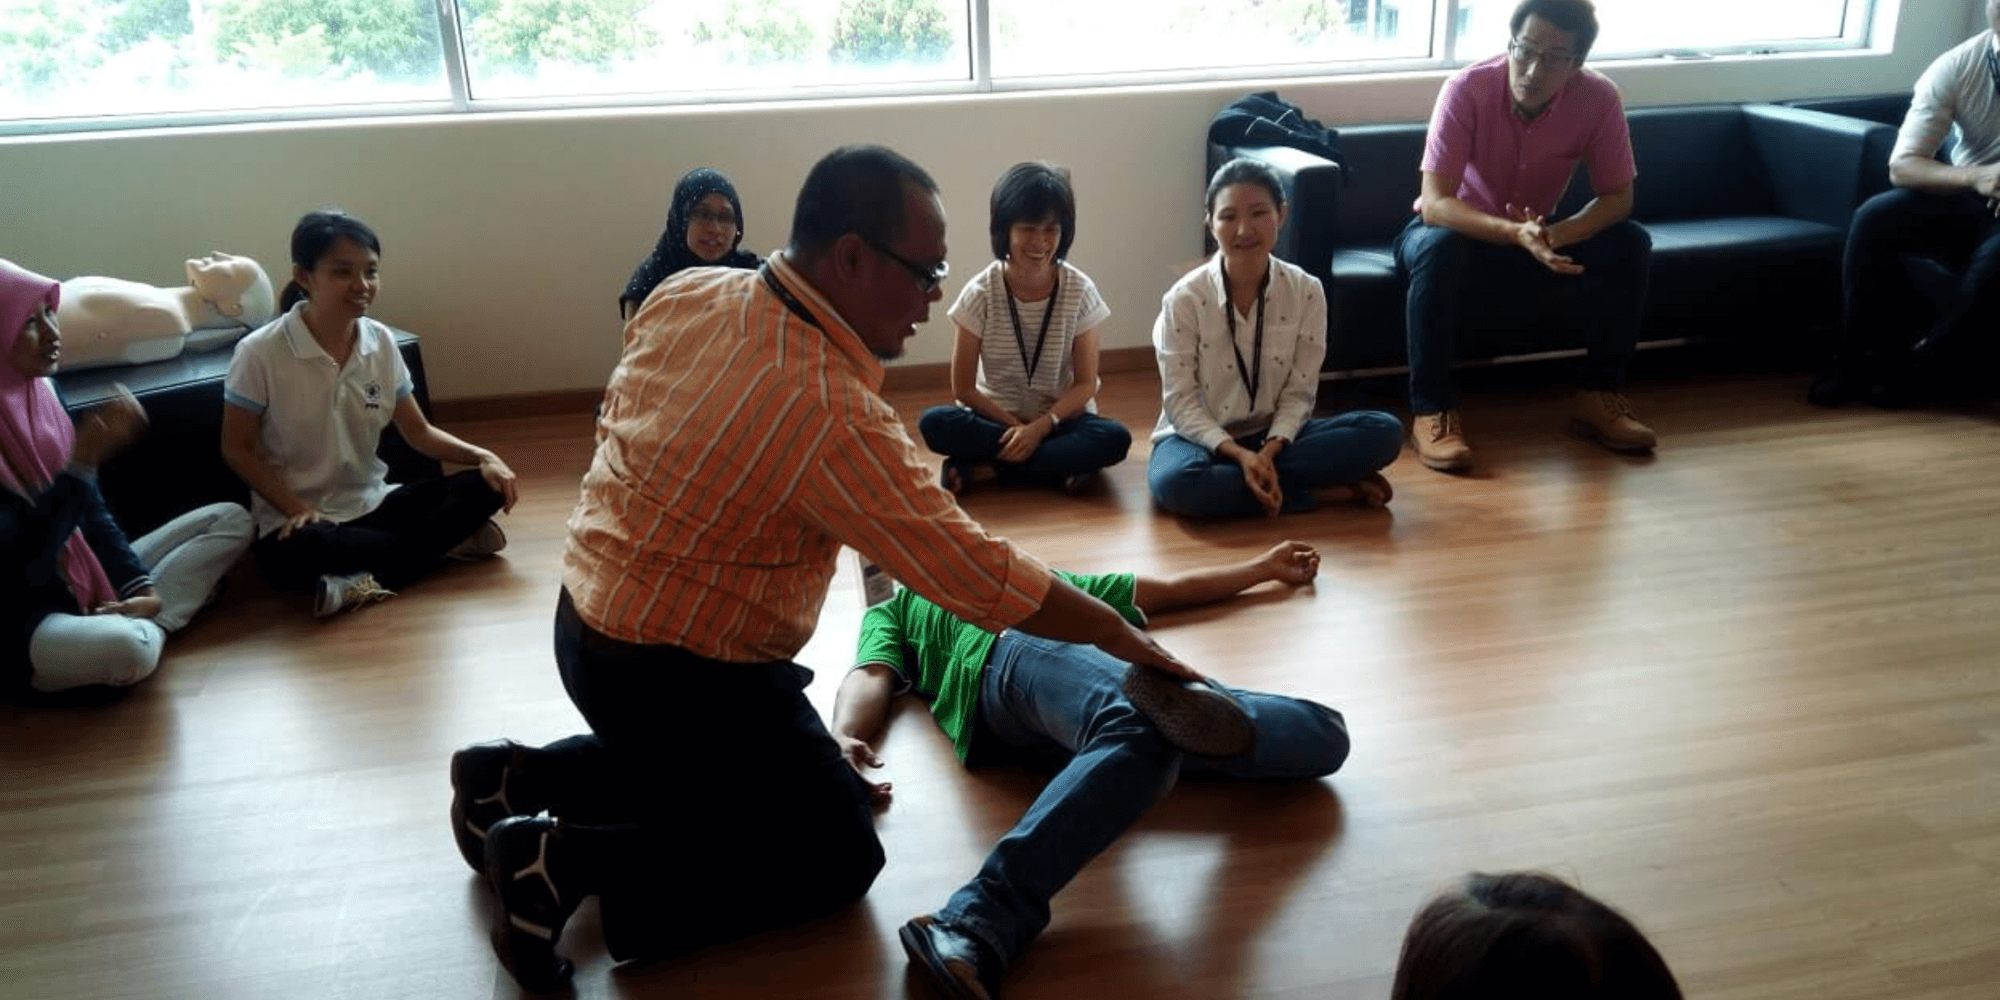 First Aid & CPR Training for PPB Staffs